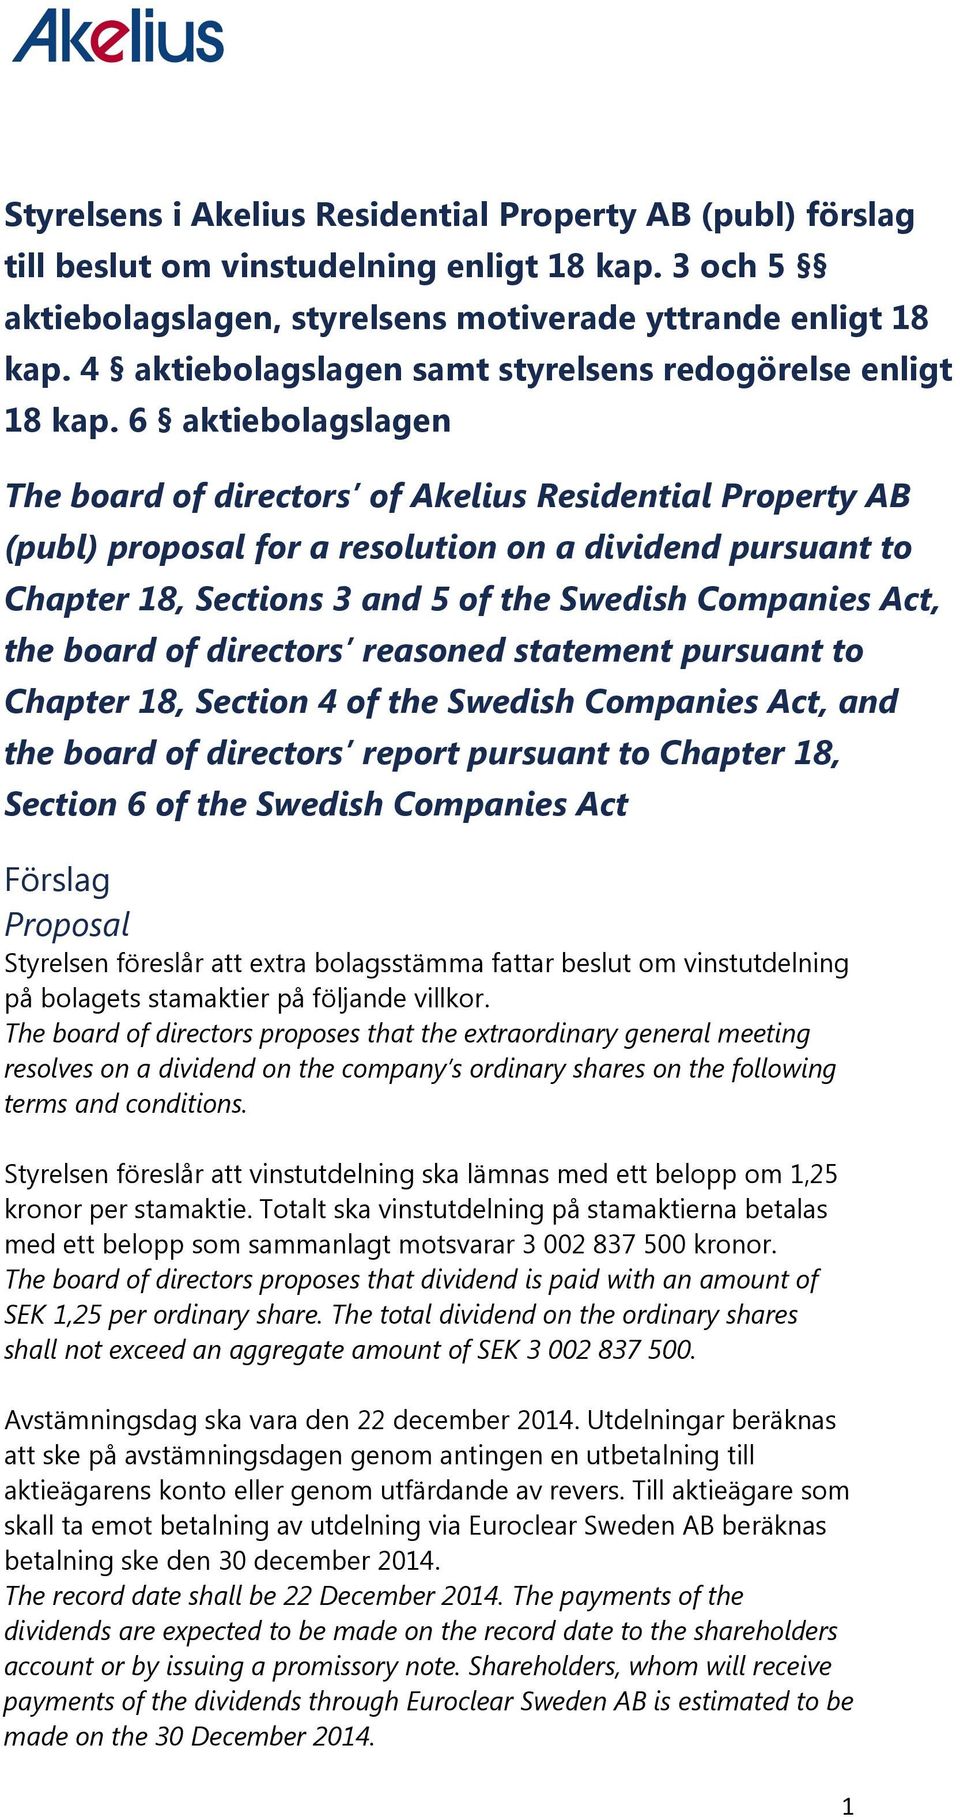 6 aktiebolagslagen The board of directors of Akelius Residential Property AB (publ) proposal for a resolution on a dividend pursuant to Chapter 18, Sections 3 and 5 of the Swedish Companies Act, the